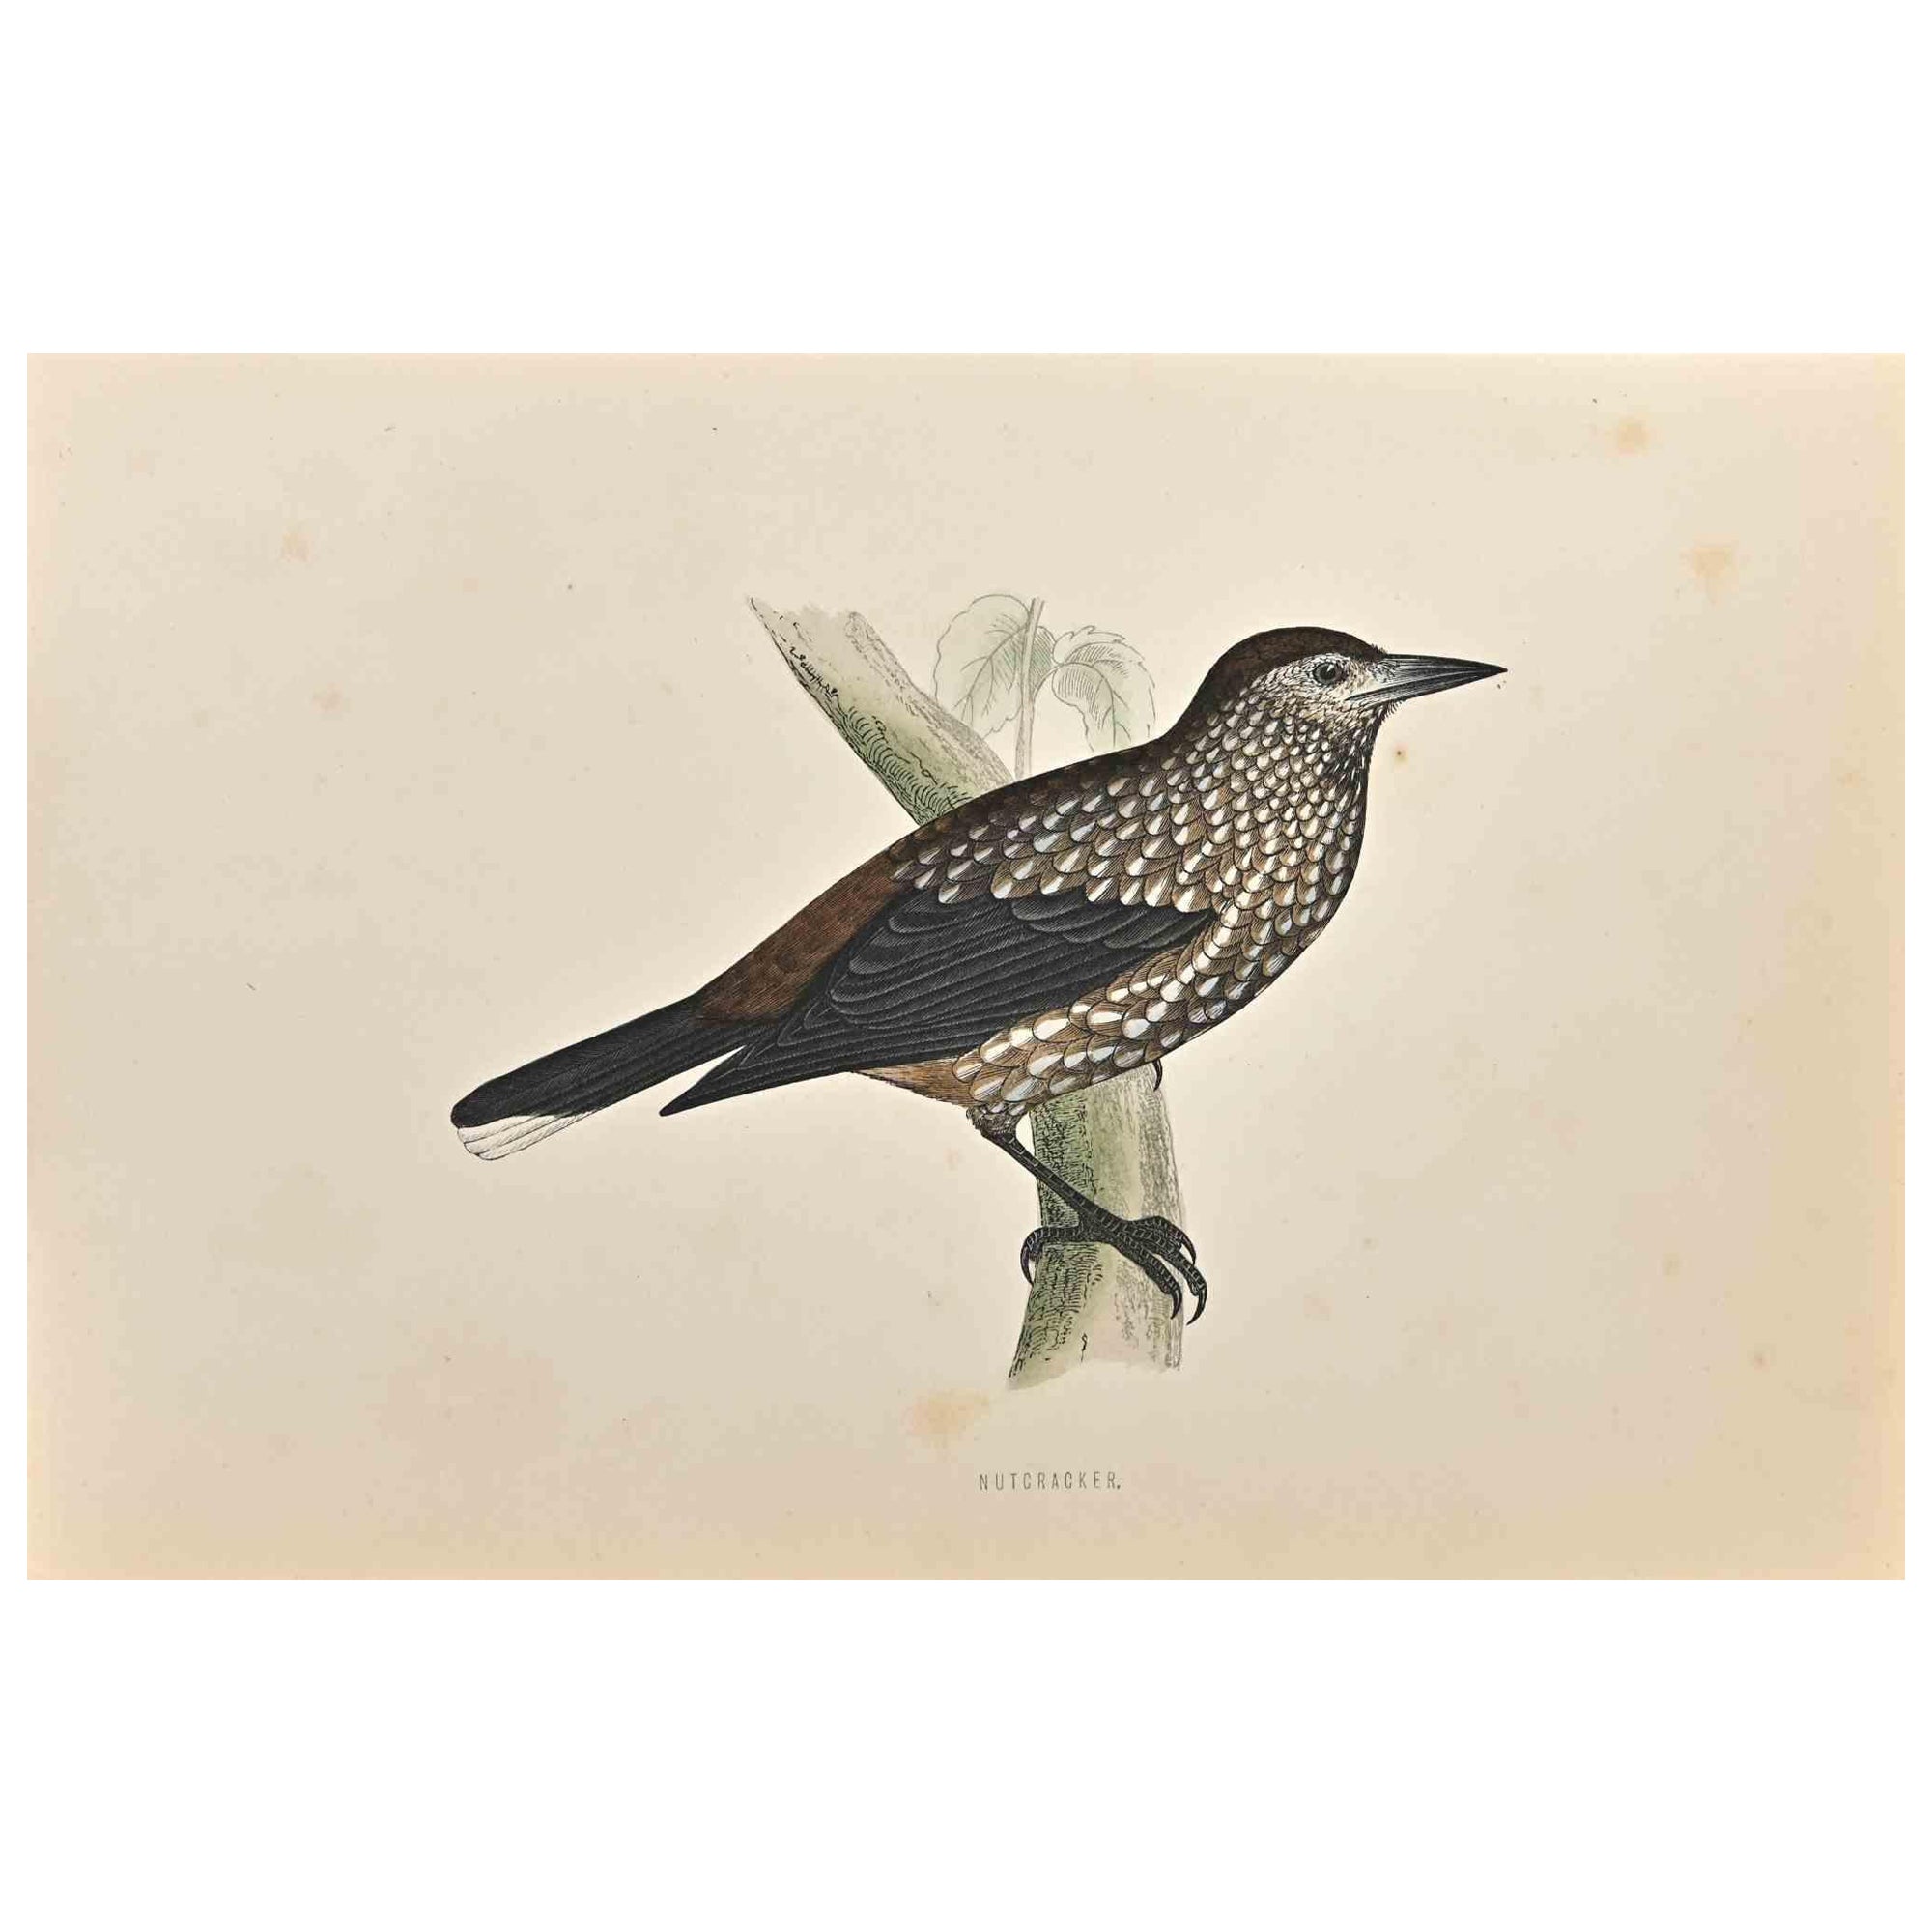 Nutcracker is a modern artwork realized in 1870 by the British artist Alexander Francis Lydon (1836-1917).

Woodcut print on ivory-colored paper.

Hand-colored, published by London, Bell & Sons, 1870.  

The name of the bird is printed on the plate.